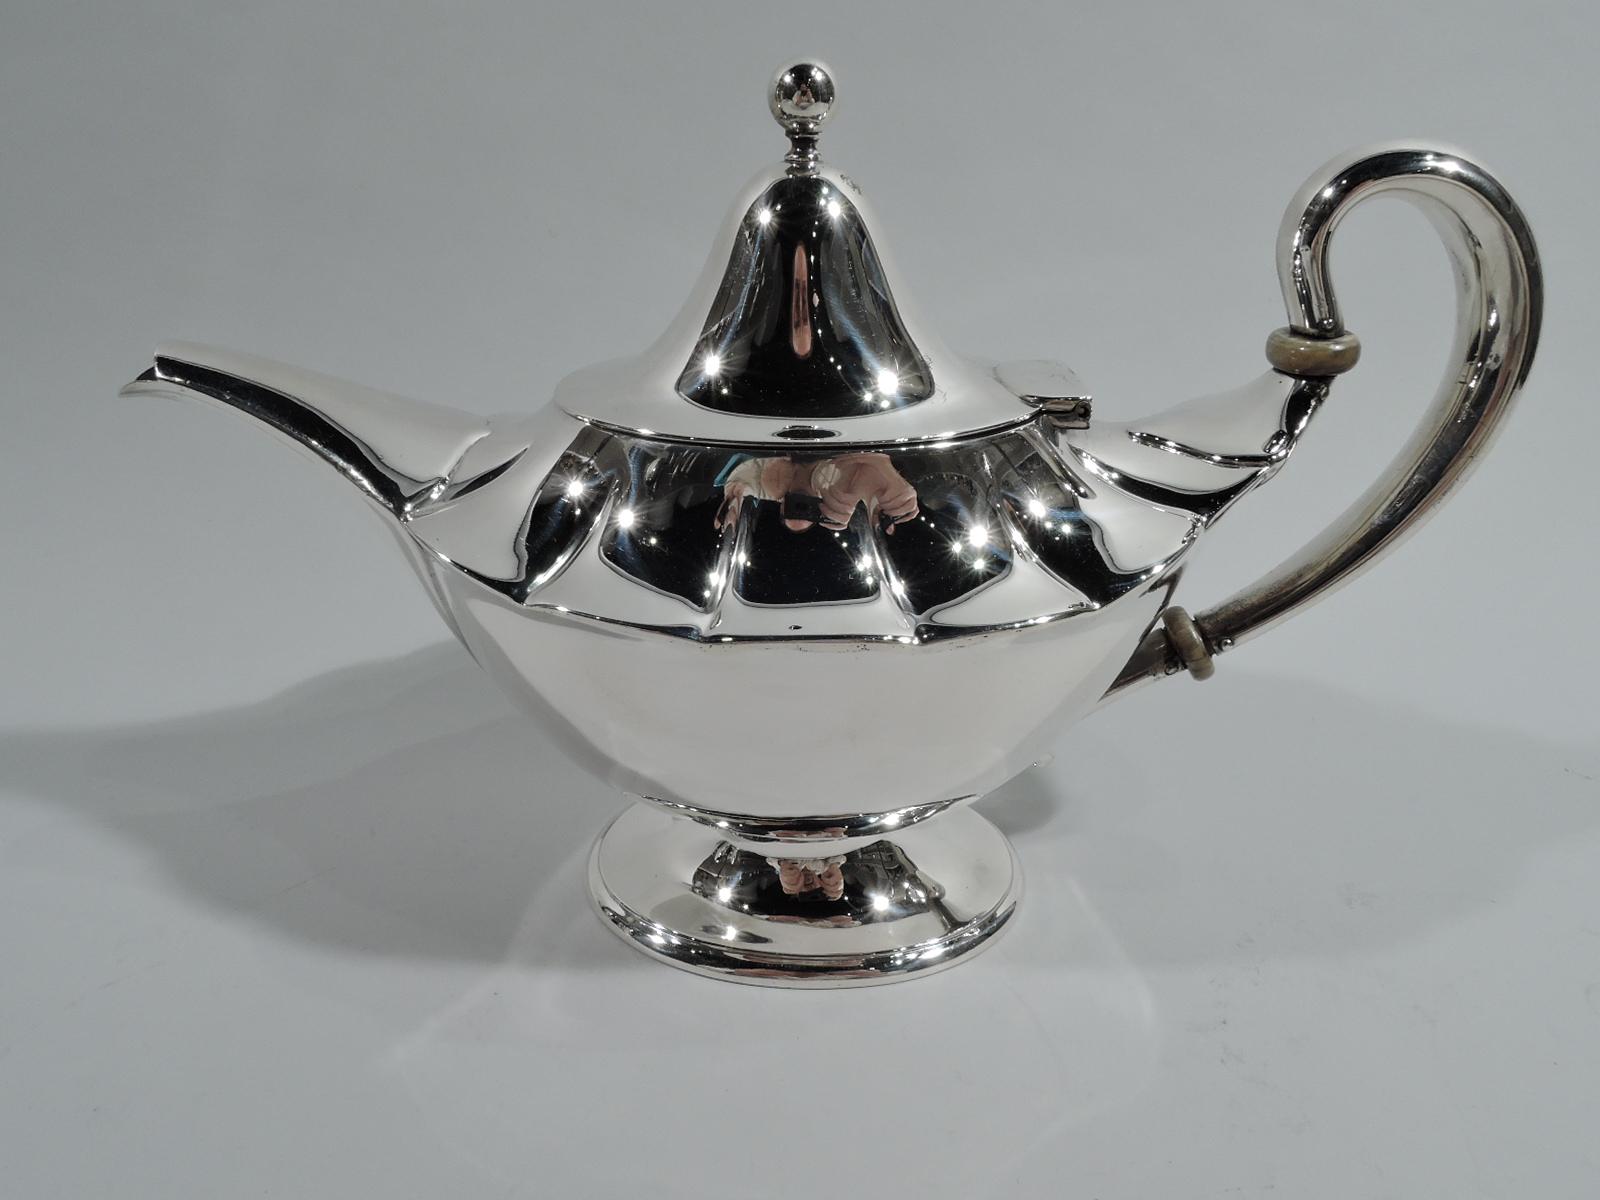 Edwardian Classical sterling silver teapot. Made by Tiffany & Co. in New York. Tapering oval bowl with wide shoulder lobes, high-looping handle, and wide and tapering spout. Cover hinged and domed with ball finial. Raised oval foot. Fully marked